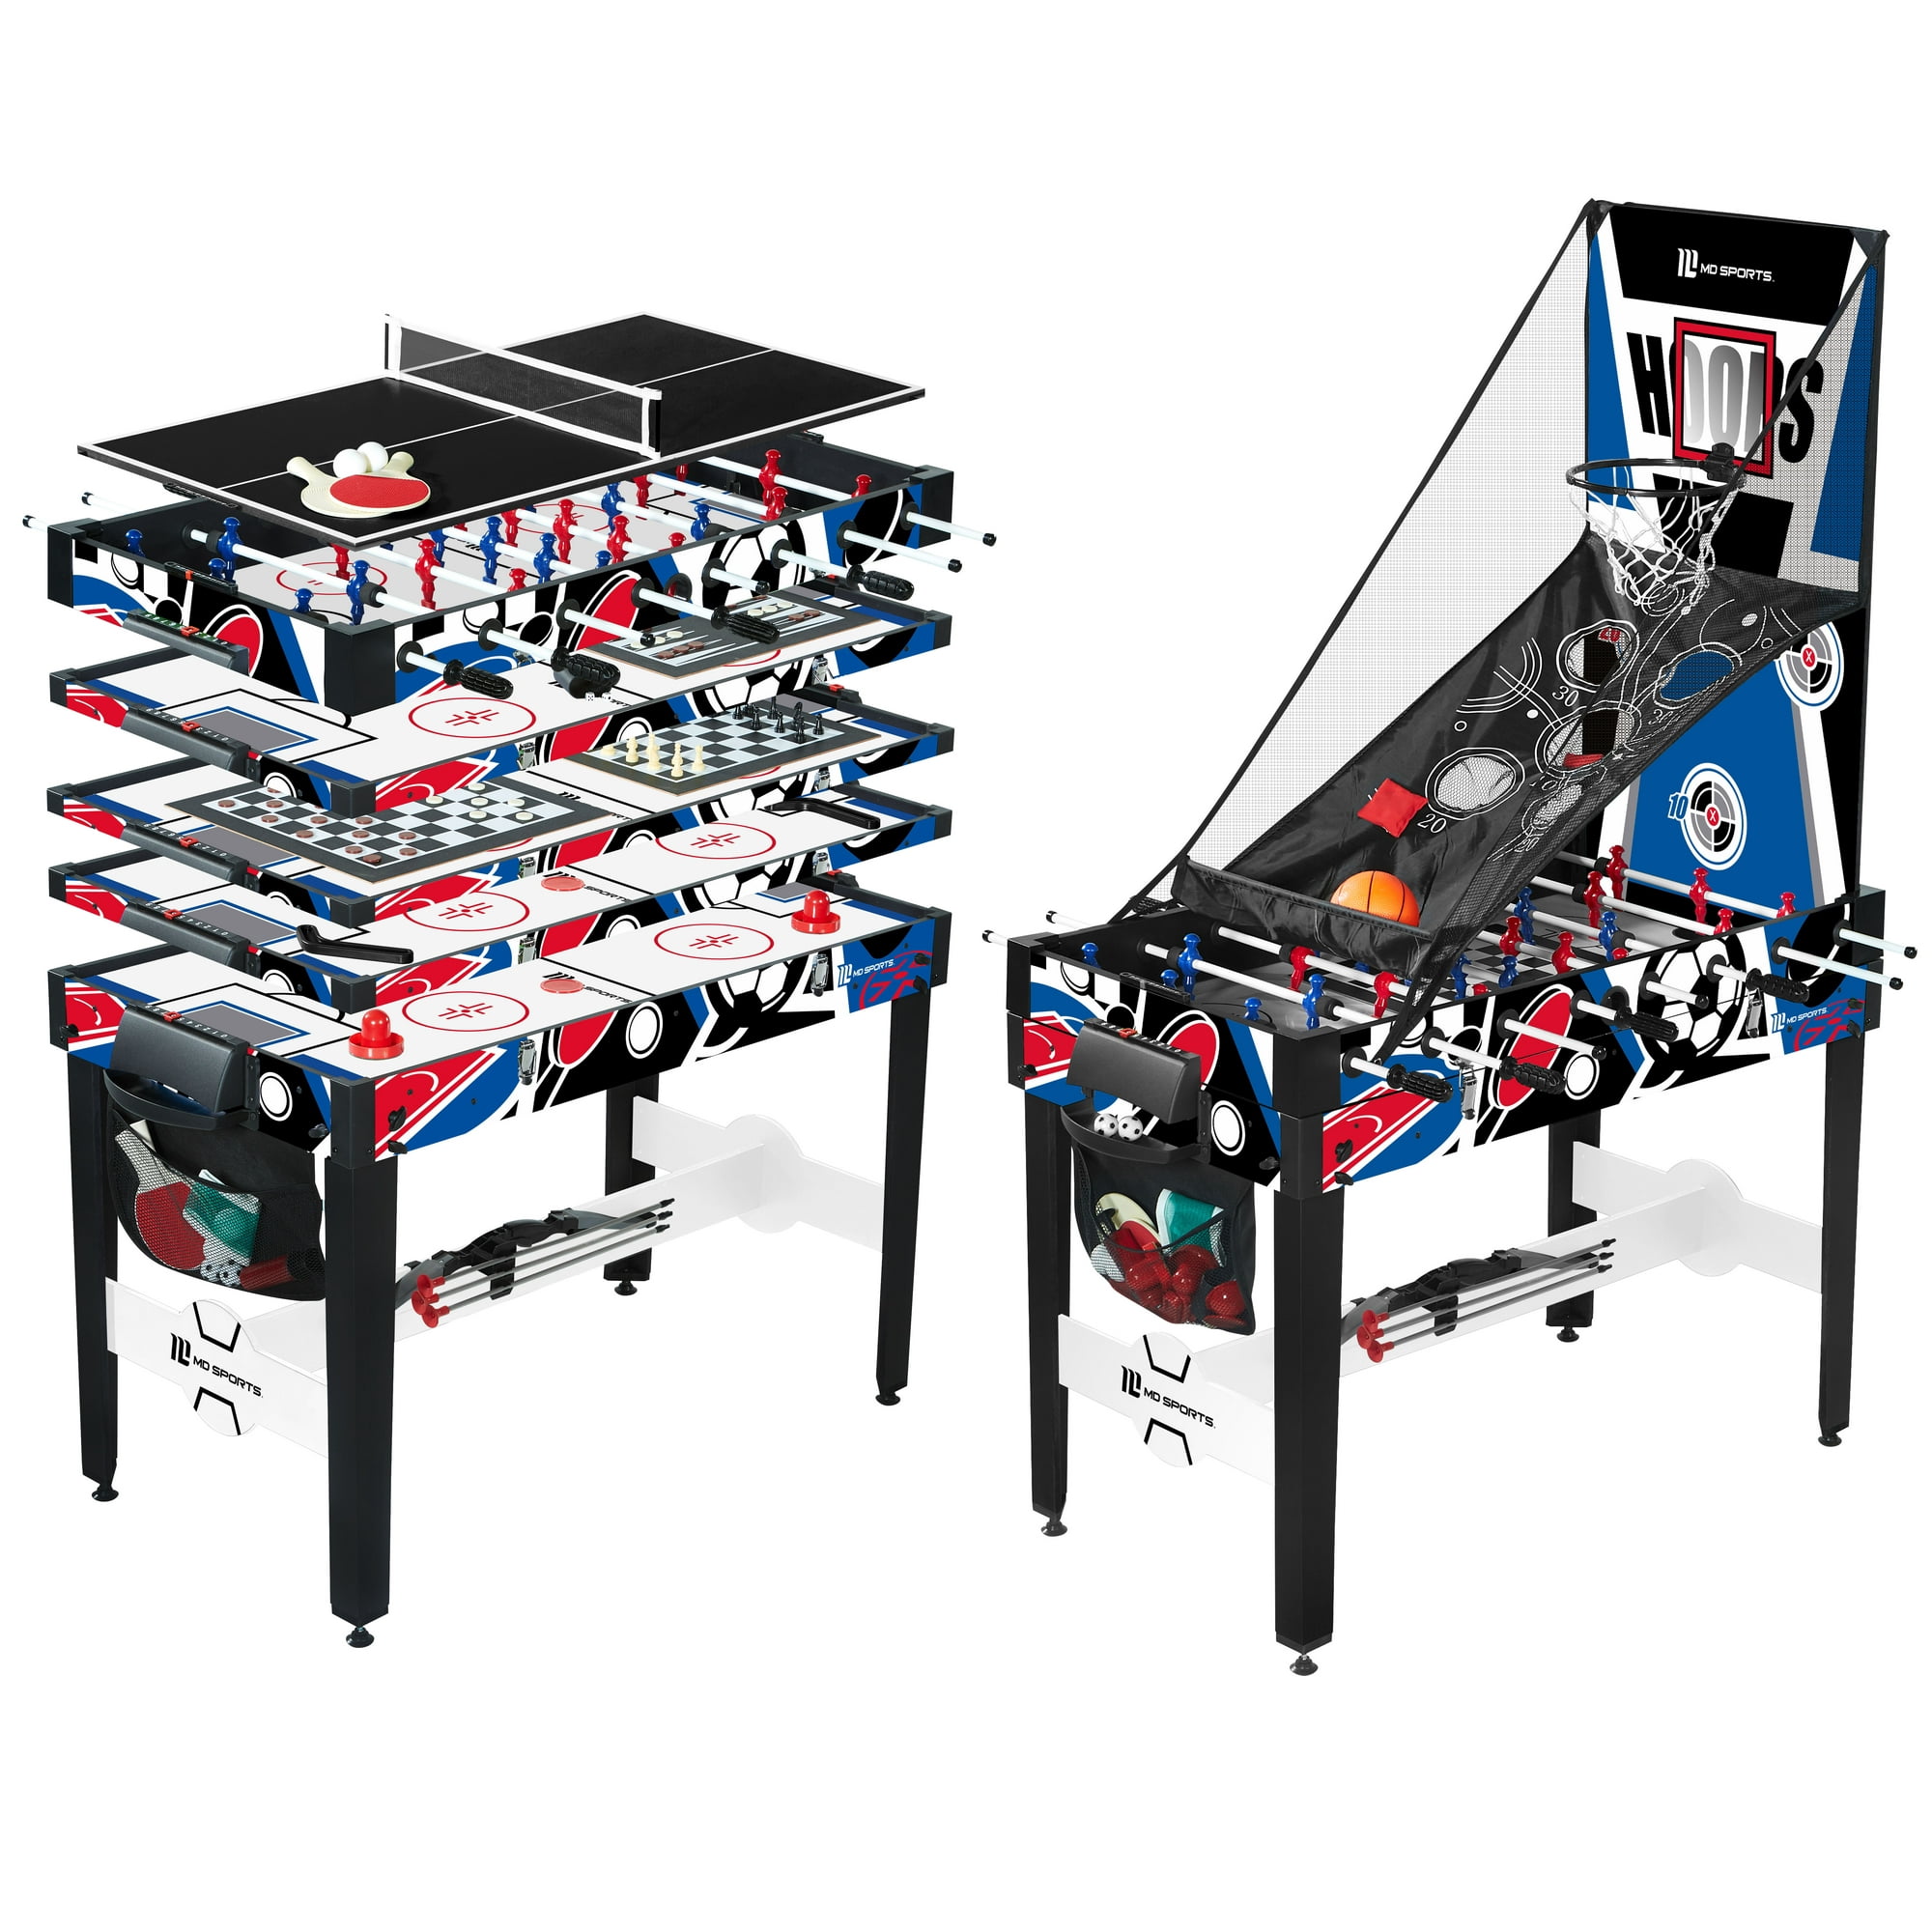 tuberculosis suck A lot of nice good MD Sports 12-in-1 Multi Game Table Set for Adults, Kids, Families -  Foosball Tables with 5 Conversion Tops, 4 Board Games, and Multiplayer  Sports Games, All-Inclusive - Combination Arcade Games Kit | Walmart Canada